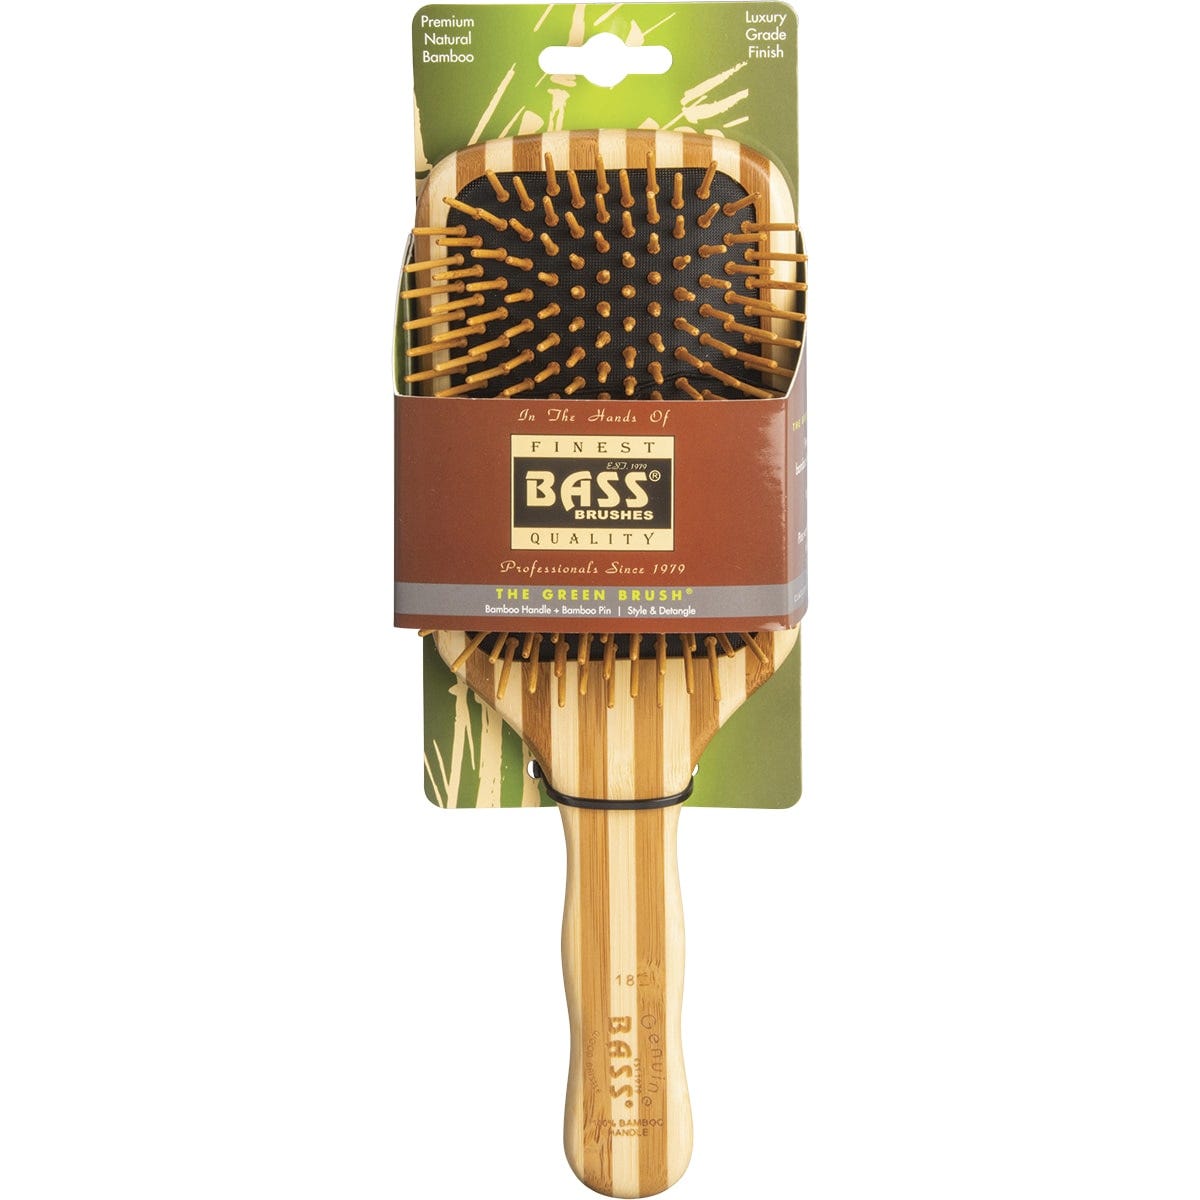 Bass Brushes Bamboo Hair Brush Large Square Paddle - Dr Earth - Hair Care